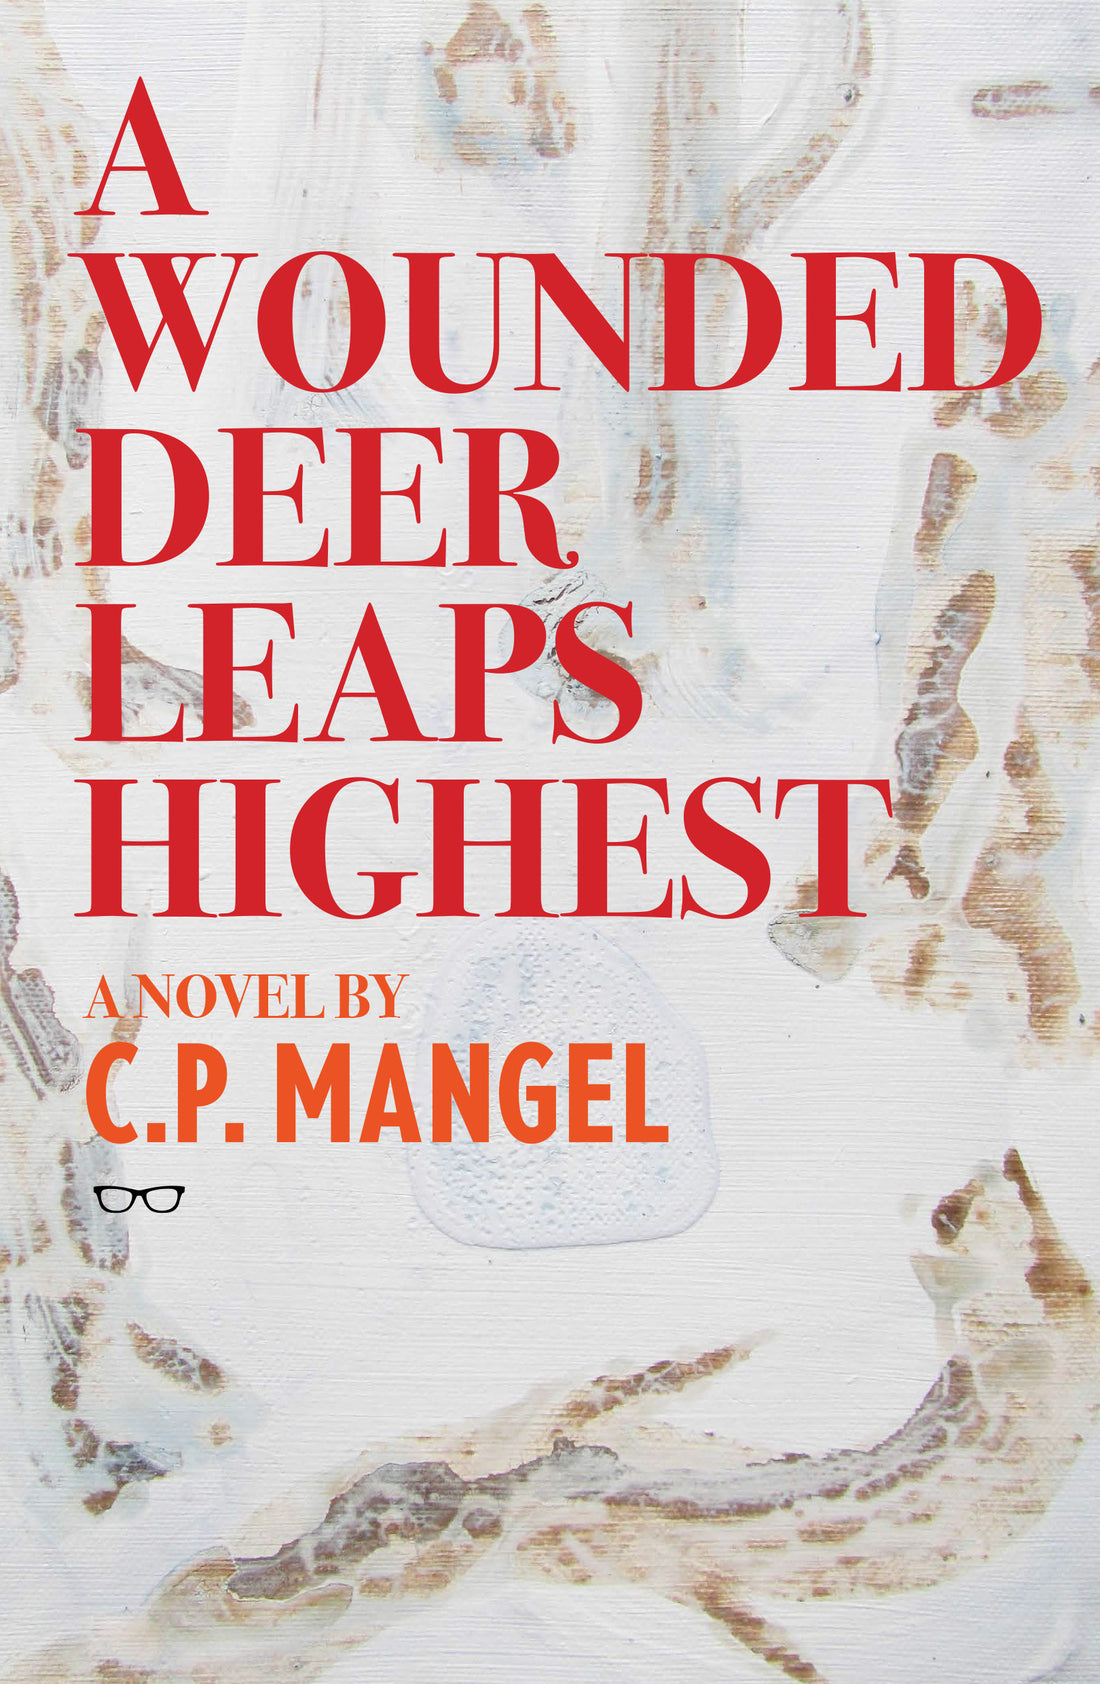 A Wounded Deer Leaps Highest Wins A Silver IPPY Award